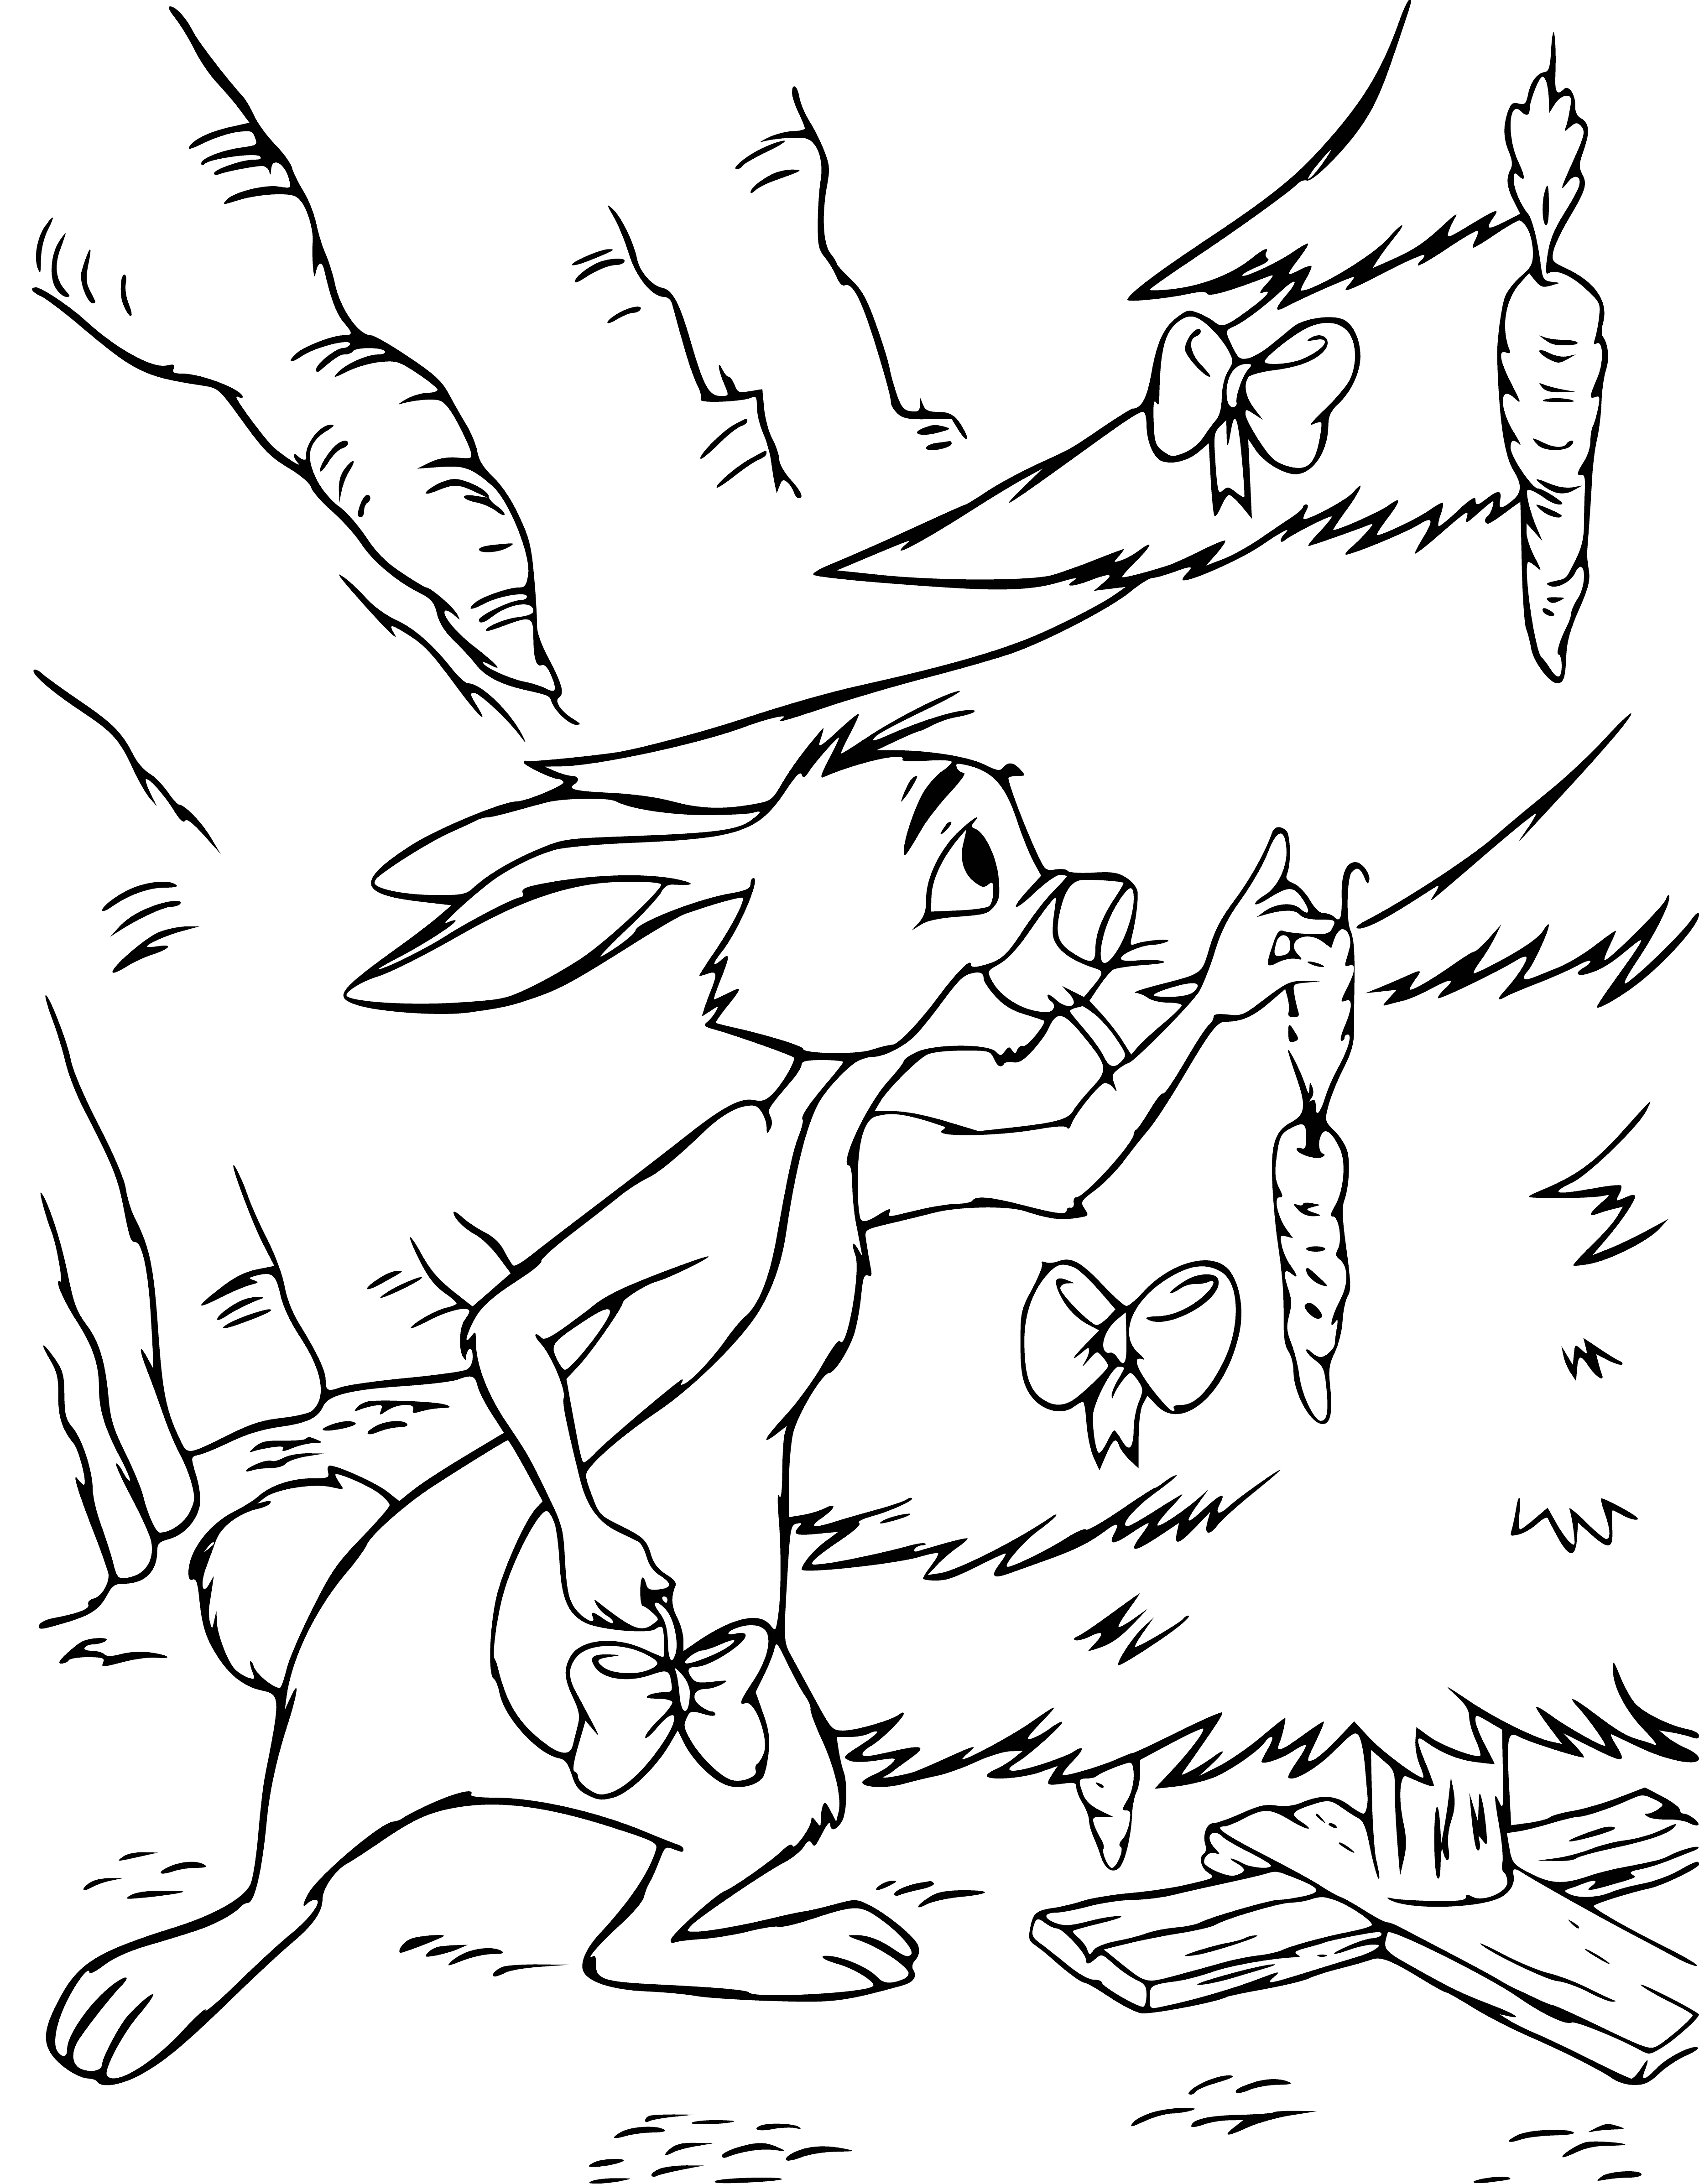 coloring page: Disney characters celebrating NYE. Rabbit decorating Christmas tree. All characters around tree, having great time.